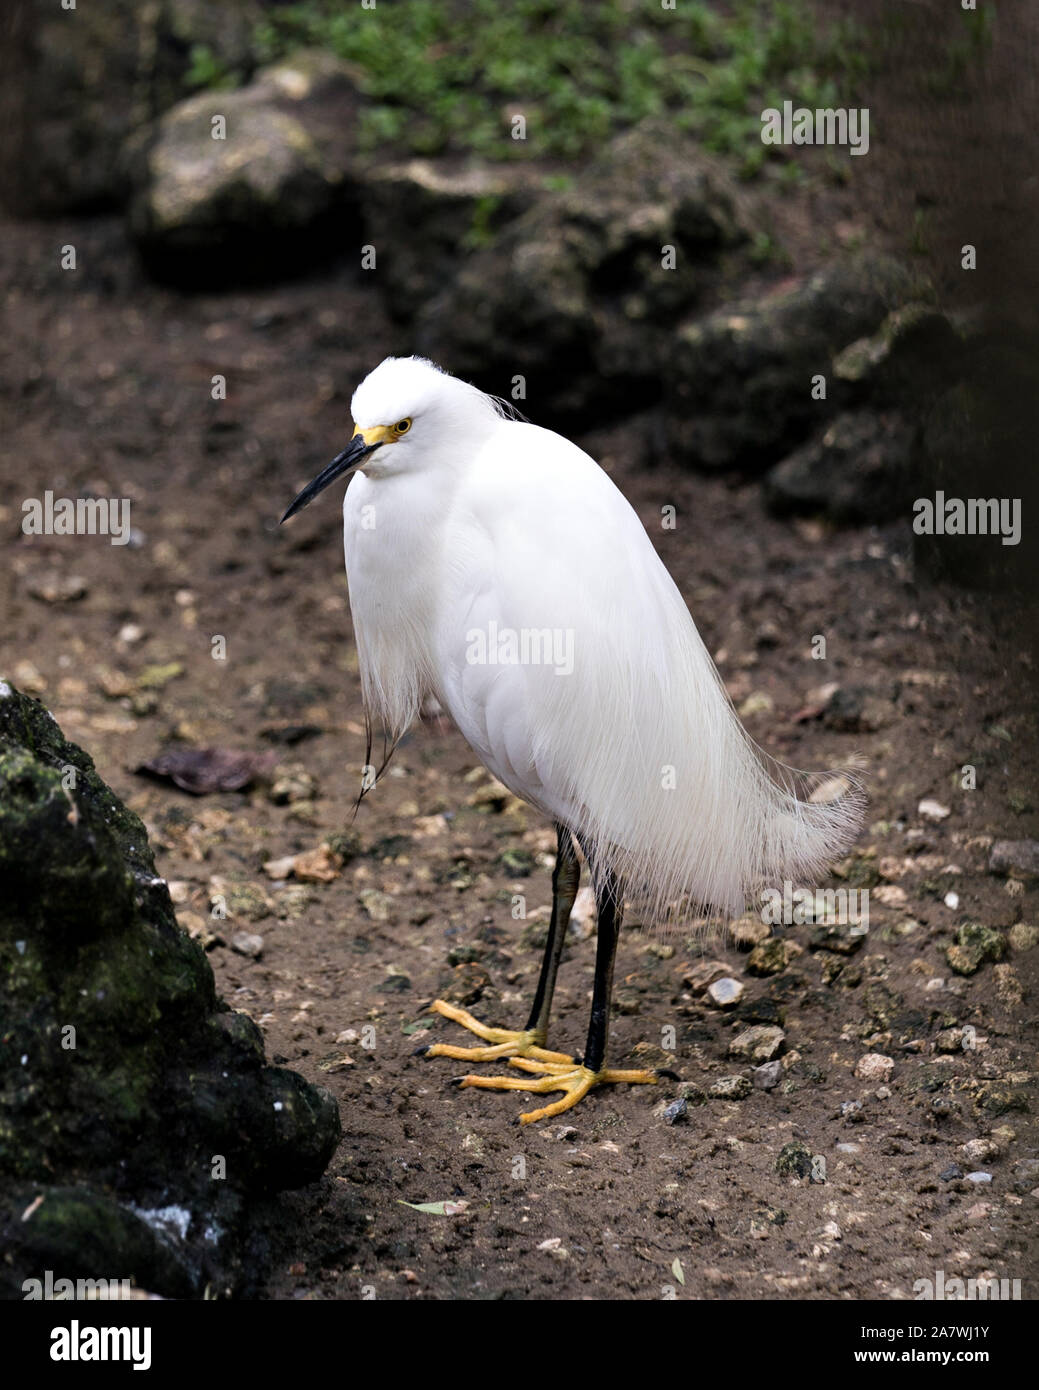 Snowy Egret close up on the ground exposing its body, head, beak, eye, black leg and yellow feet in its environment and surrounding with a nice backgr Stock Photo